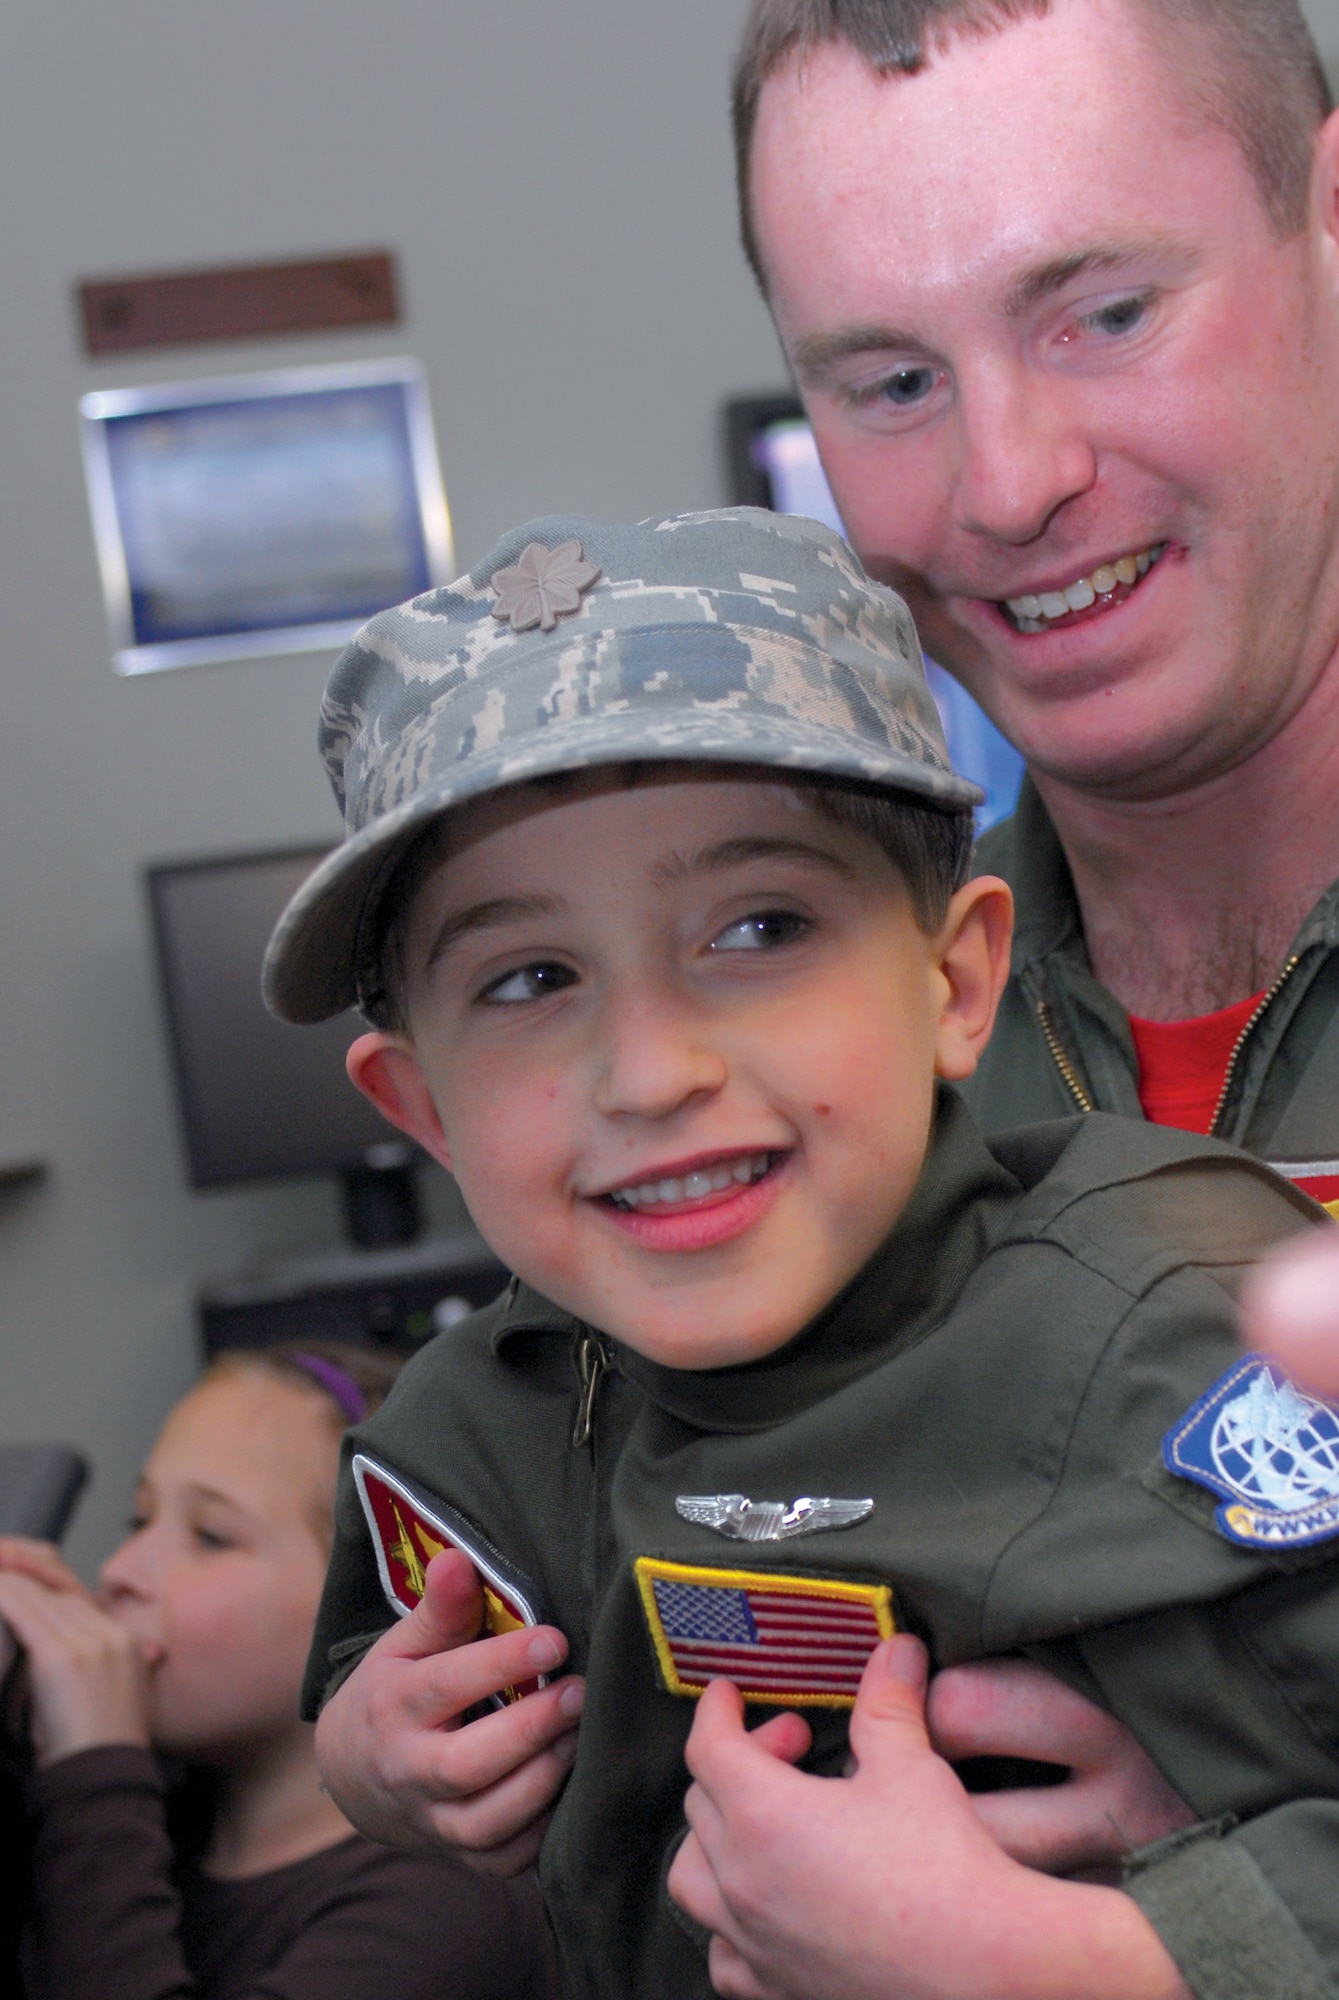 Capt. Matthew Acer, with the 56th Operations Support Squadron, lifts Pilot-for-a-day Micah Fraley, 6, to the top of the 62nd Fighter Squadron Operations desk for a flight briefing during his visit to Luke Air Force Base, Nov. 20. (U.S. Air Force photo by Senior Airman Tracie Forte)